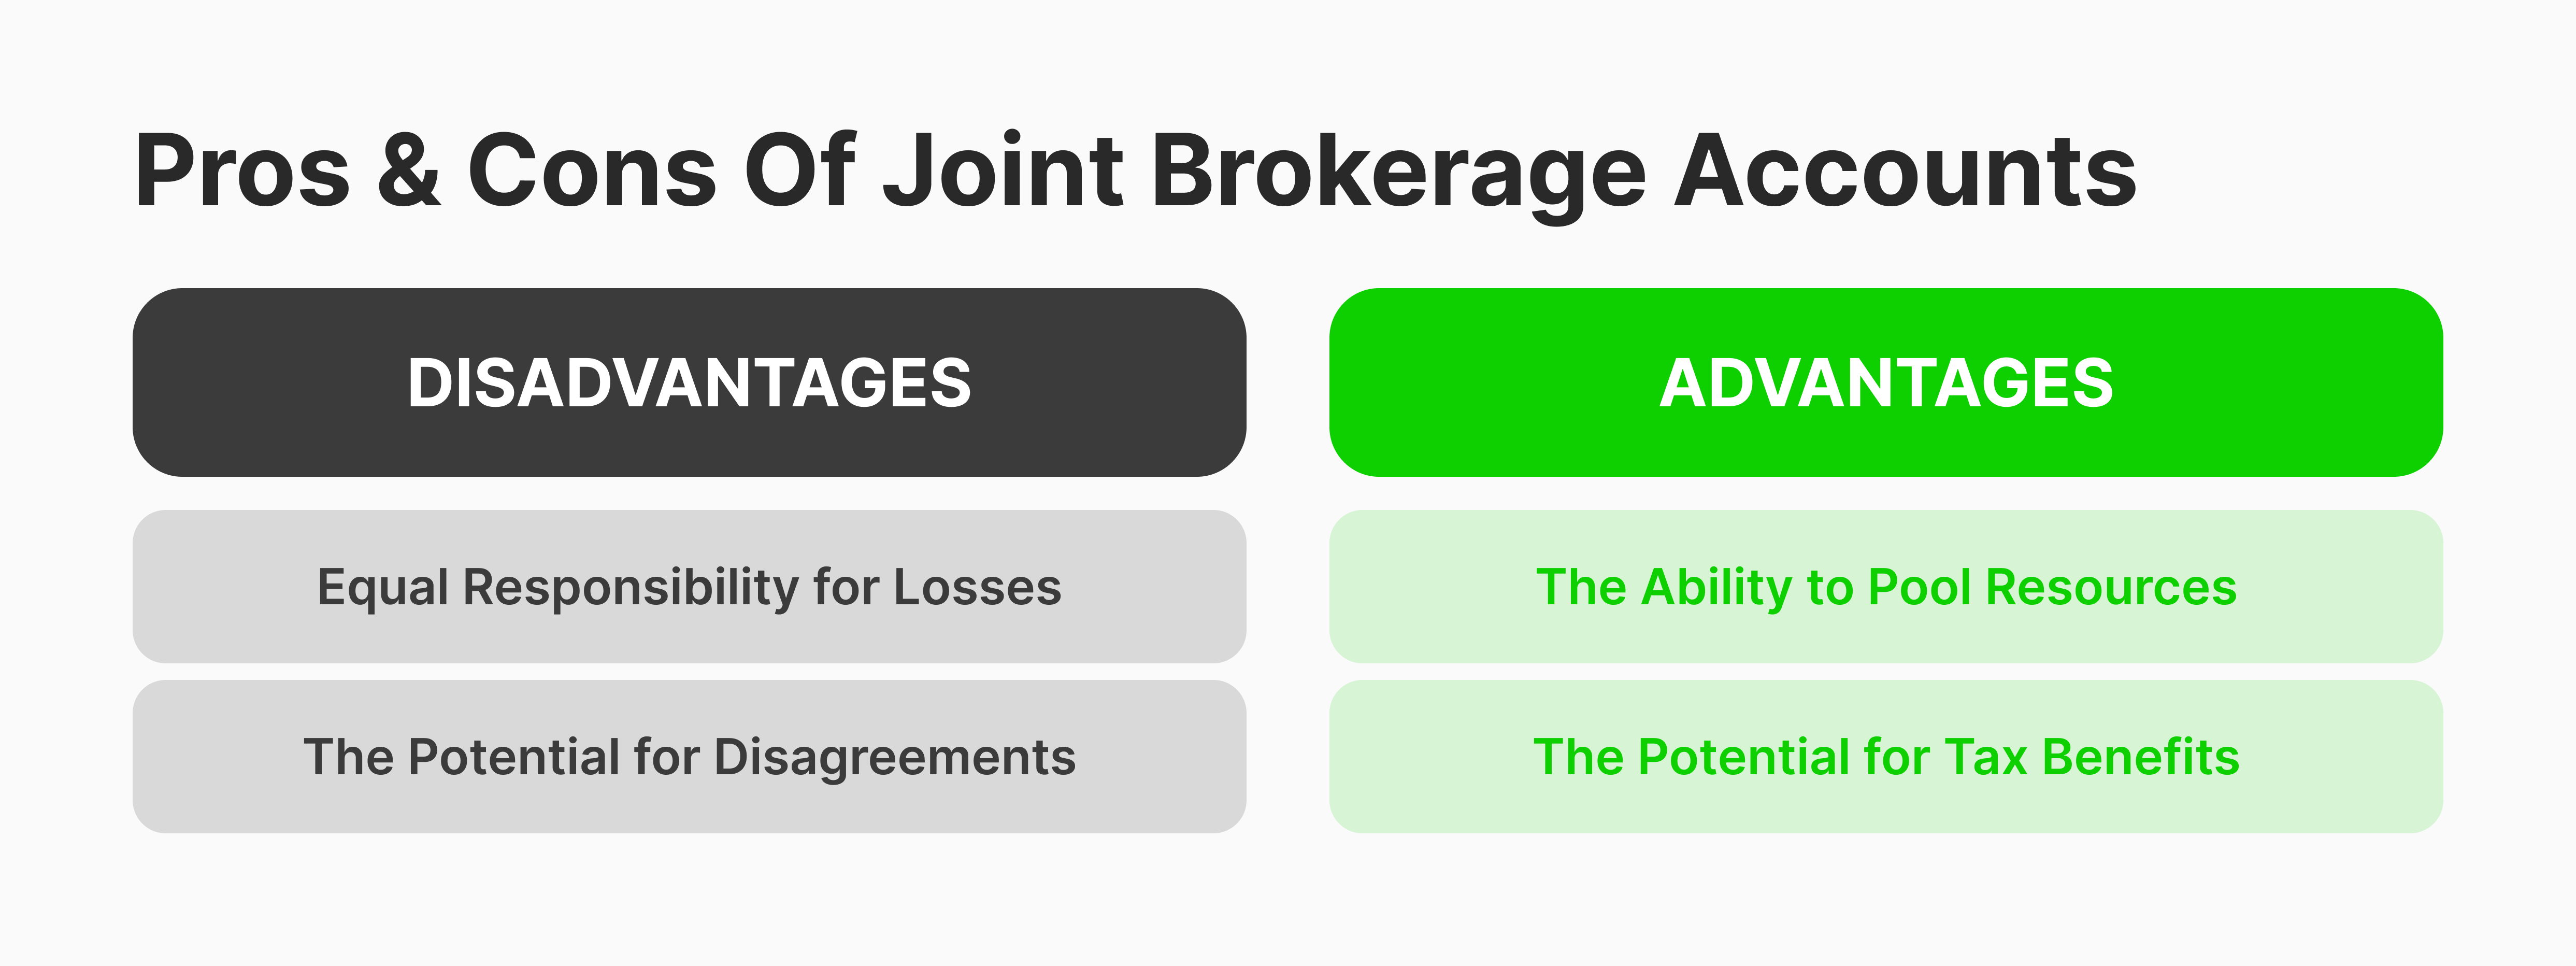 Pros and cons of Joint Brokerage Accounts